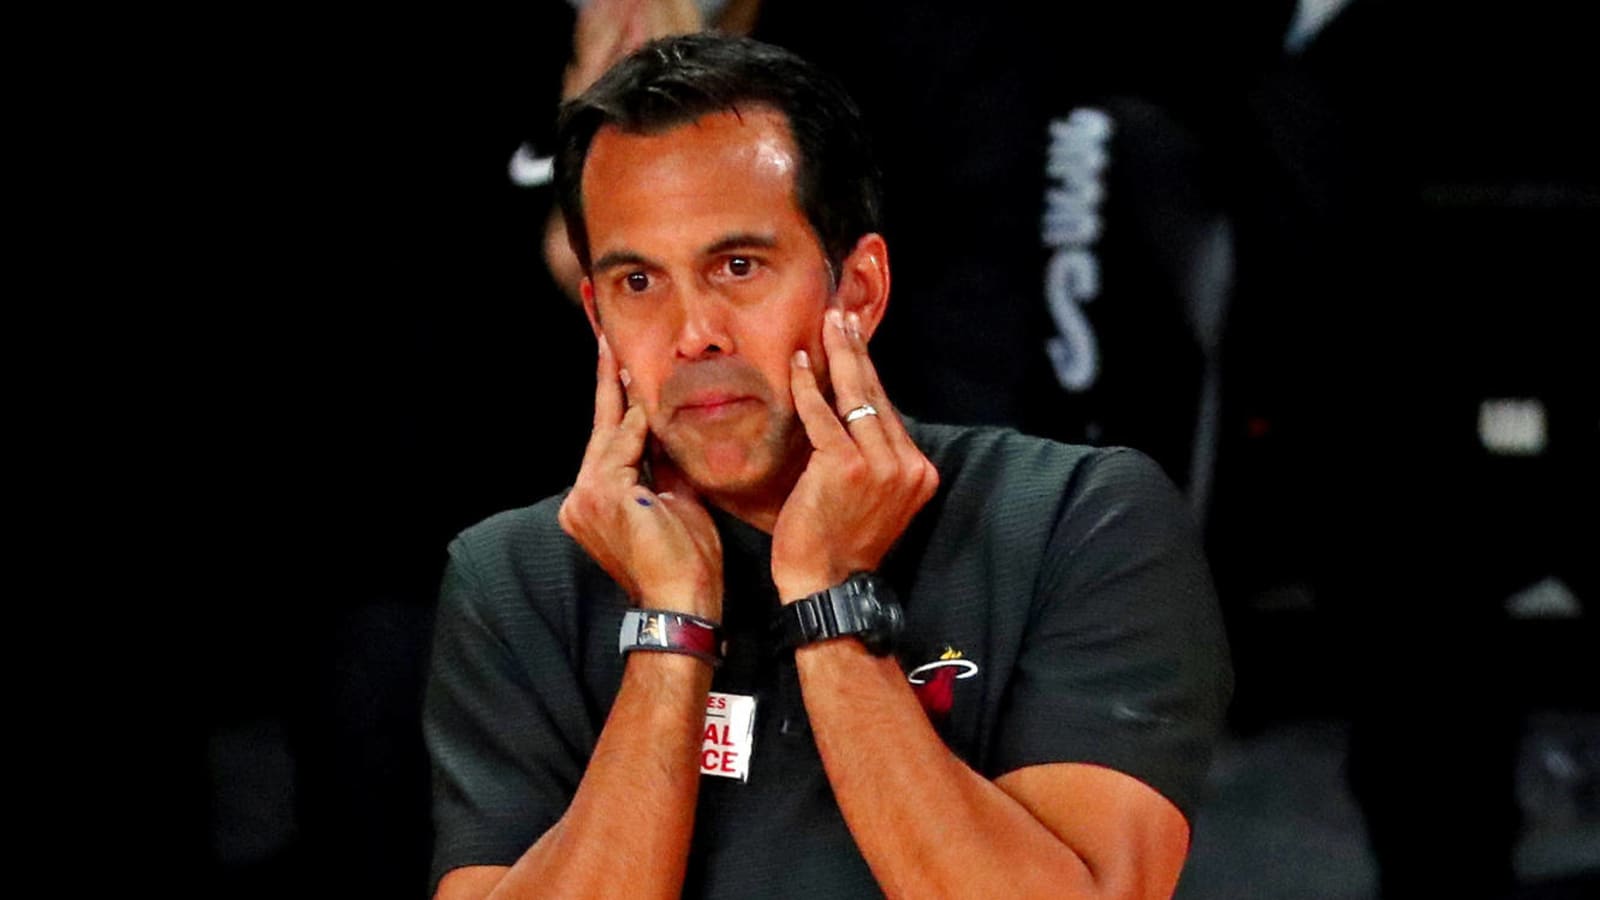 Watch: Erik Spoelstra starts crying in postgame press conference